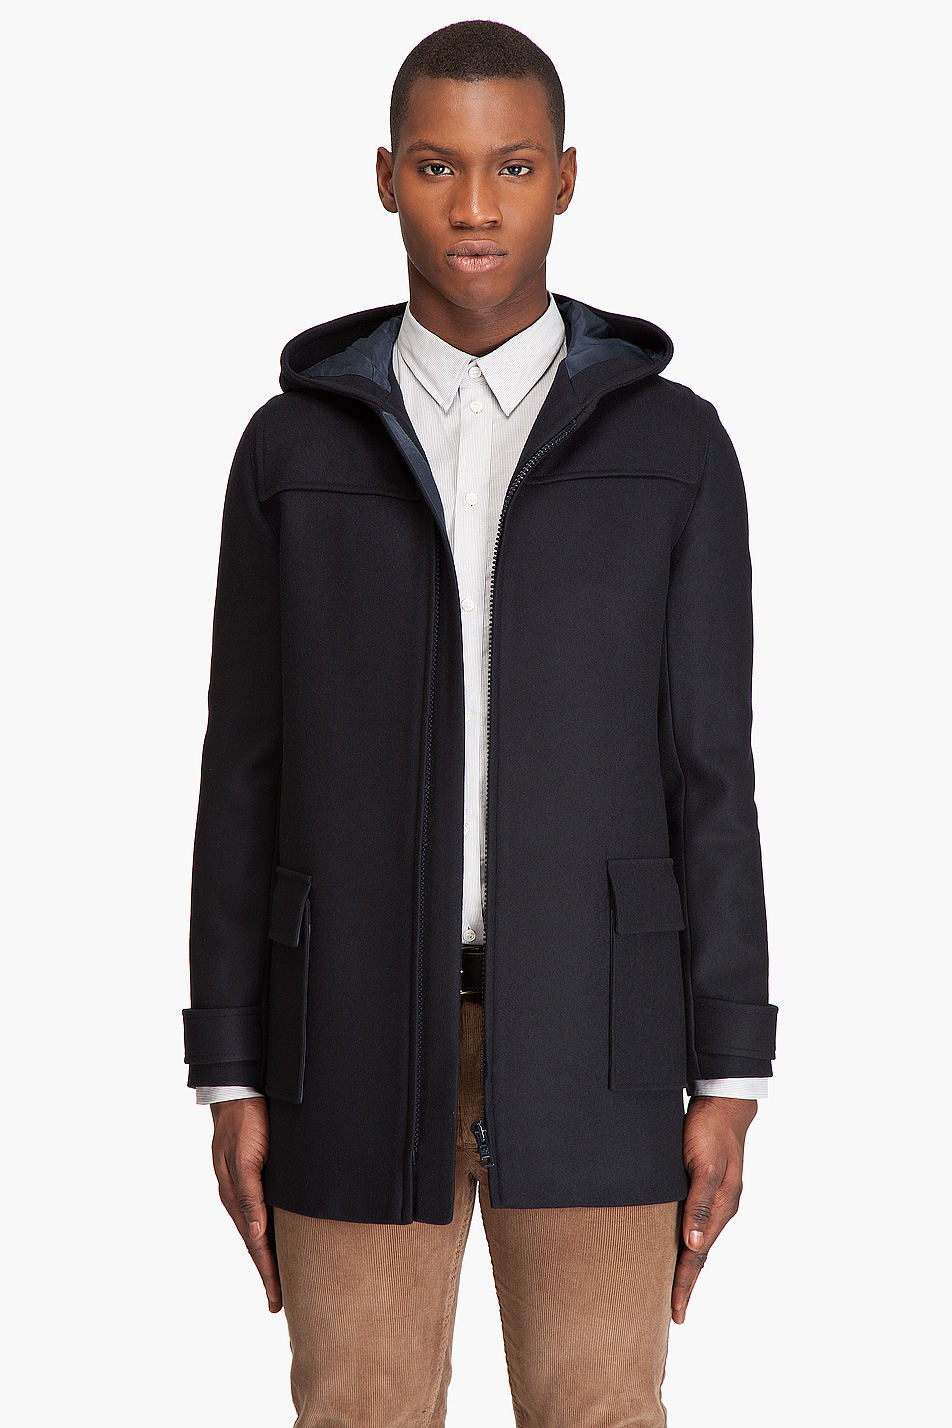 A.P.C. Hooded Wool Coat in Navy (Blue) for Men - Lyst